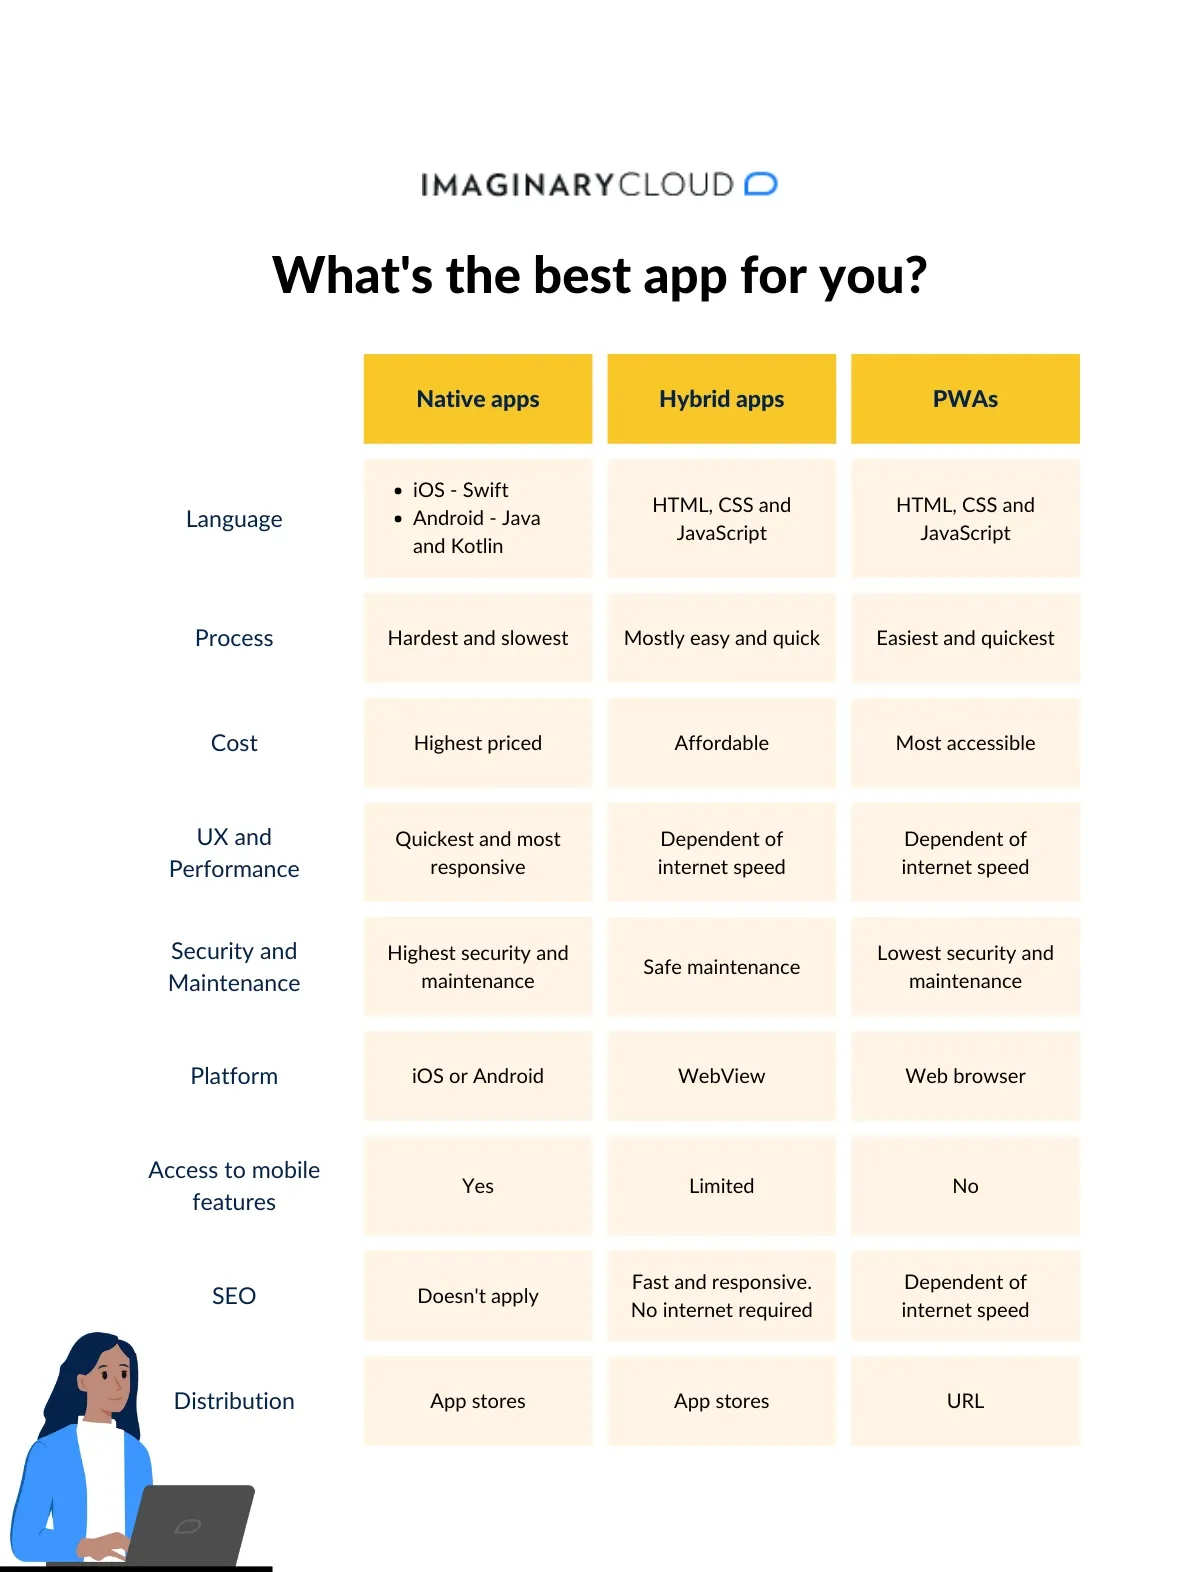 Infographic to help you decide what's the best app to develop between native apps, hybrid apps and PWAs. The categories used to compare are: programming language used, development time and cost, UX and performance, security and maintenance, platform, access to mobile features, SEO and distribution.